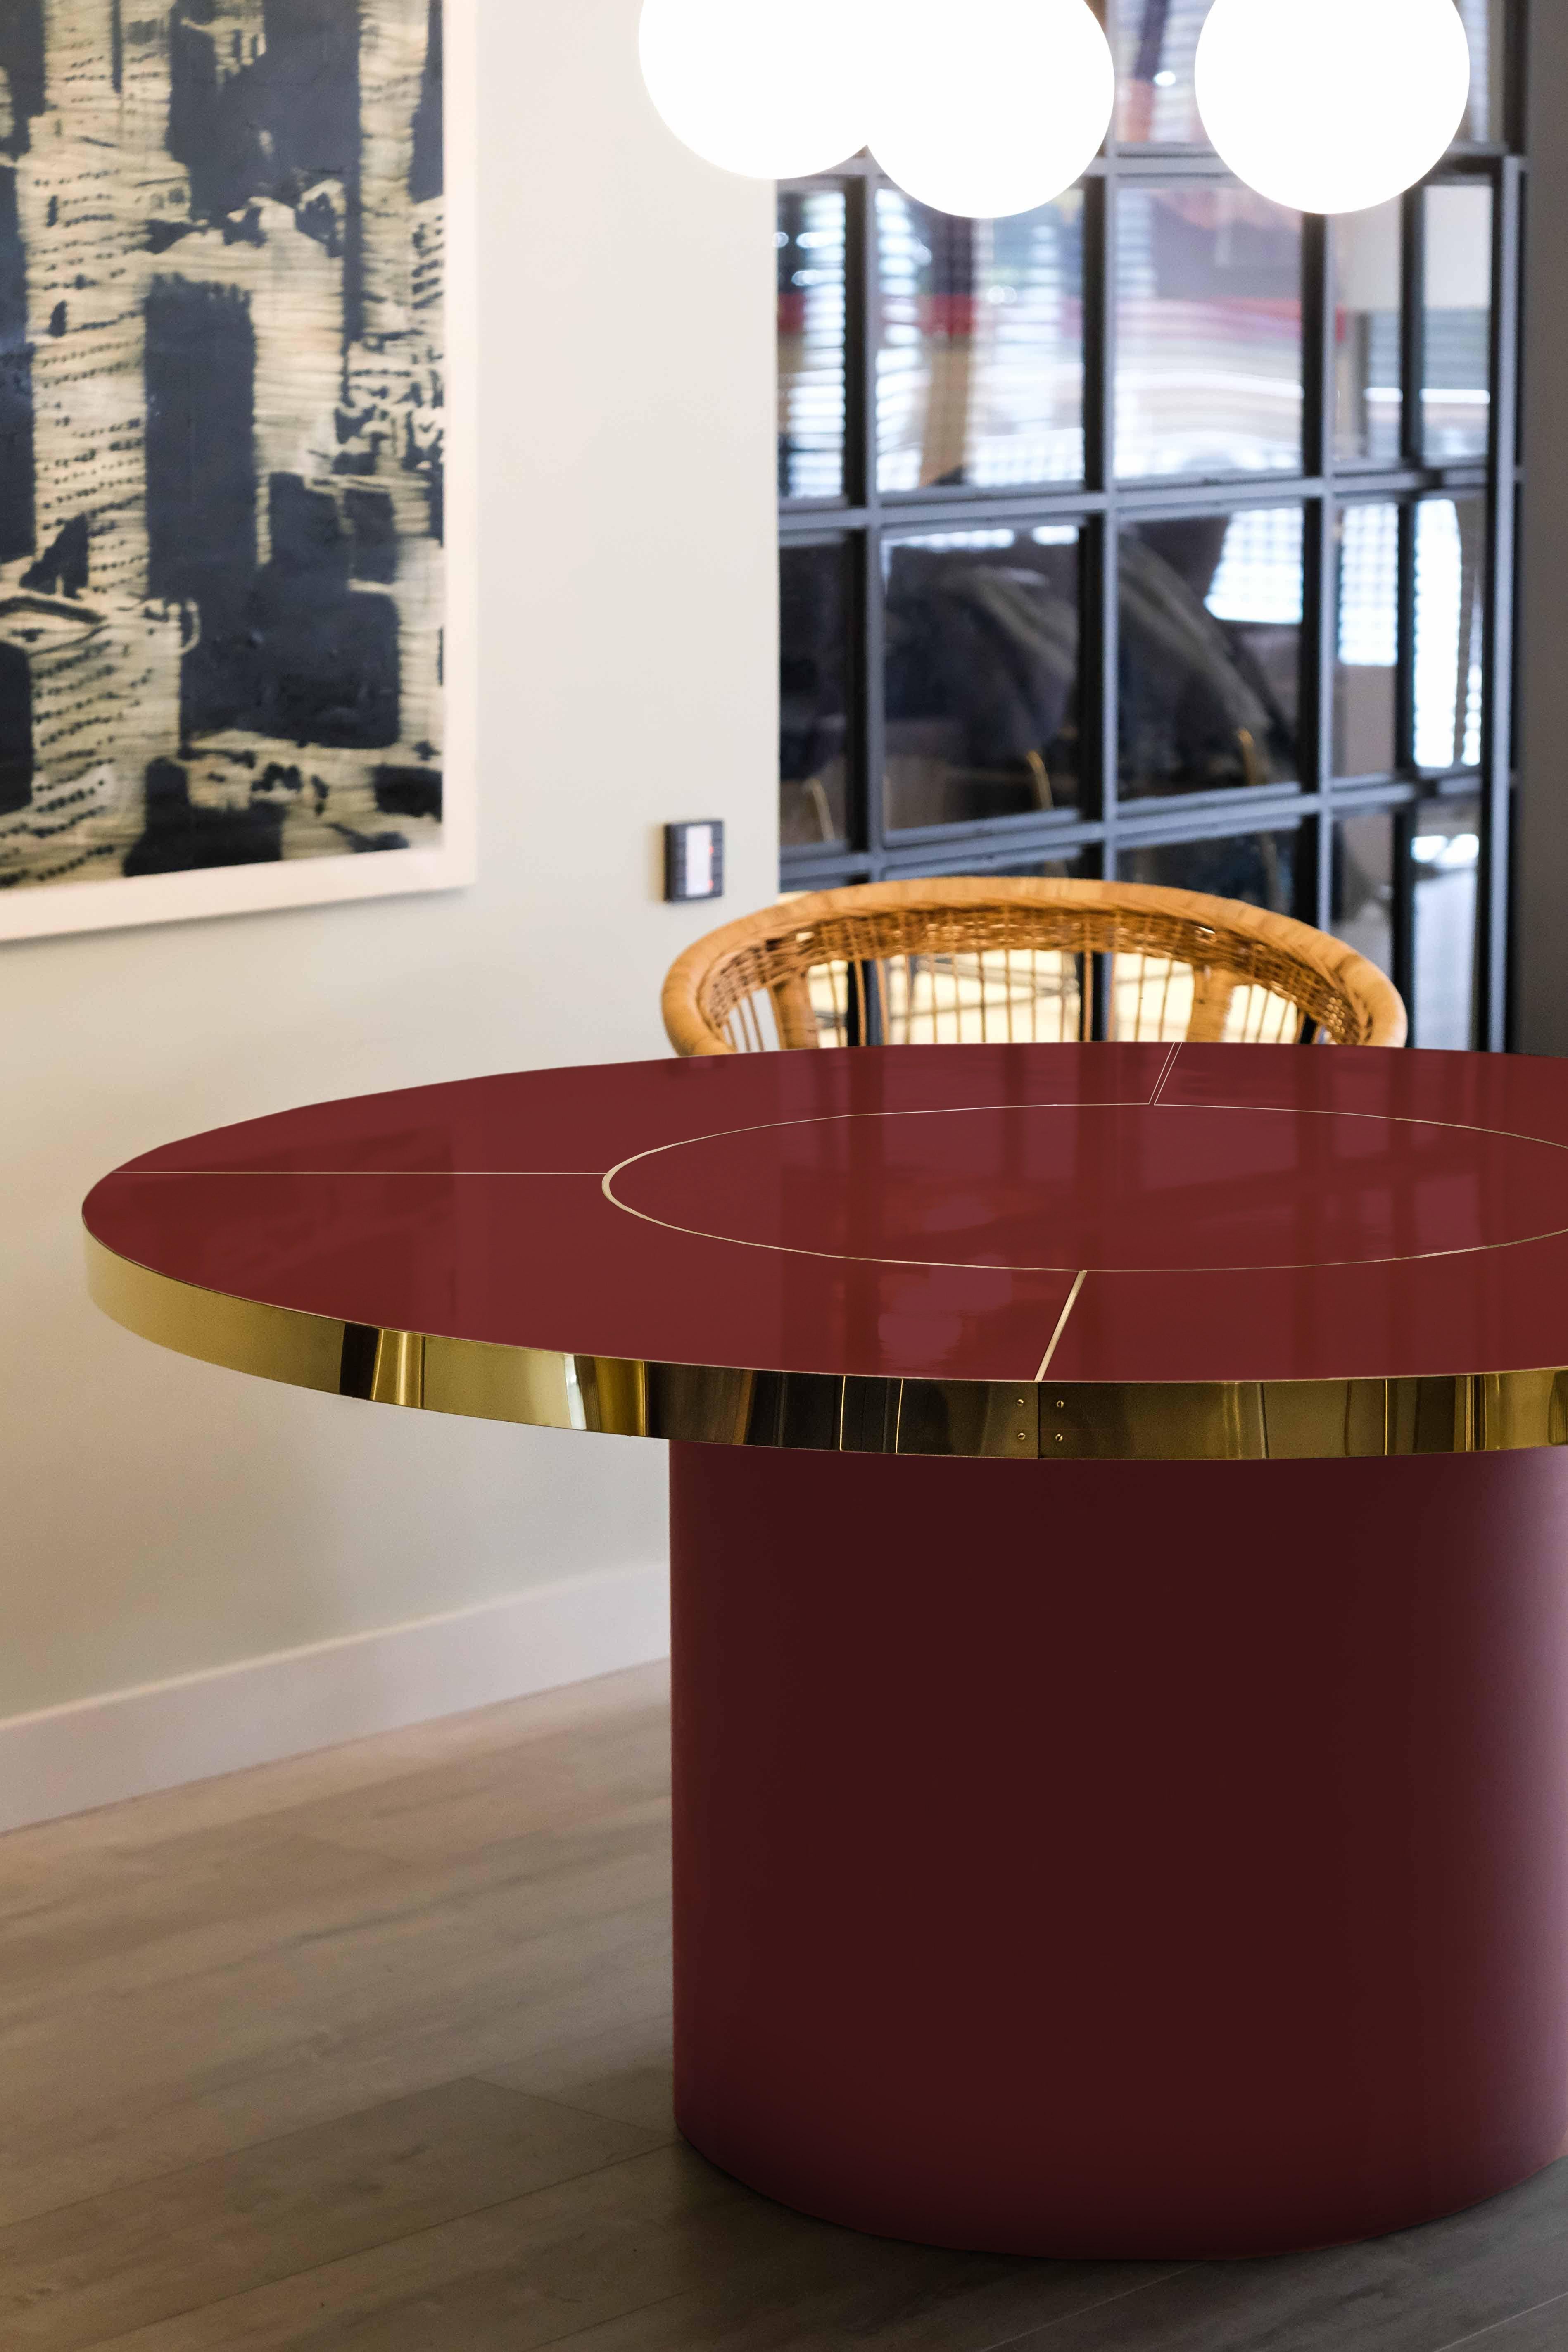 Retro Design Round Dining Table Palm Springs Style High Gloss Laminated&Brass L For Sale 1